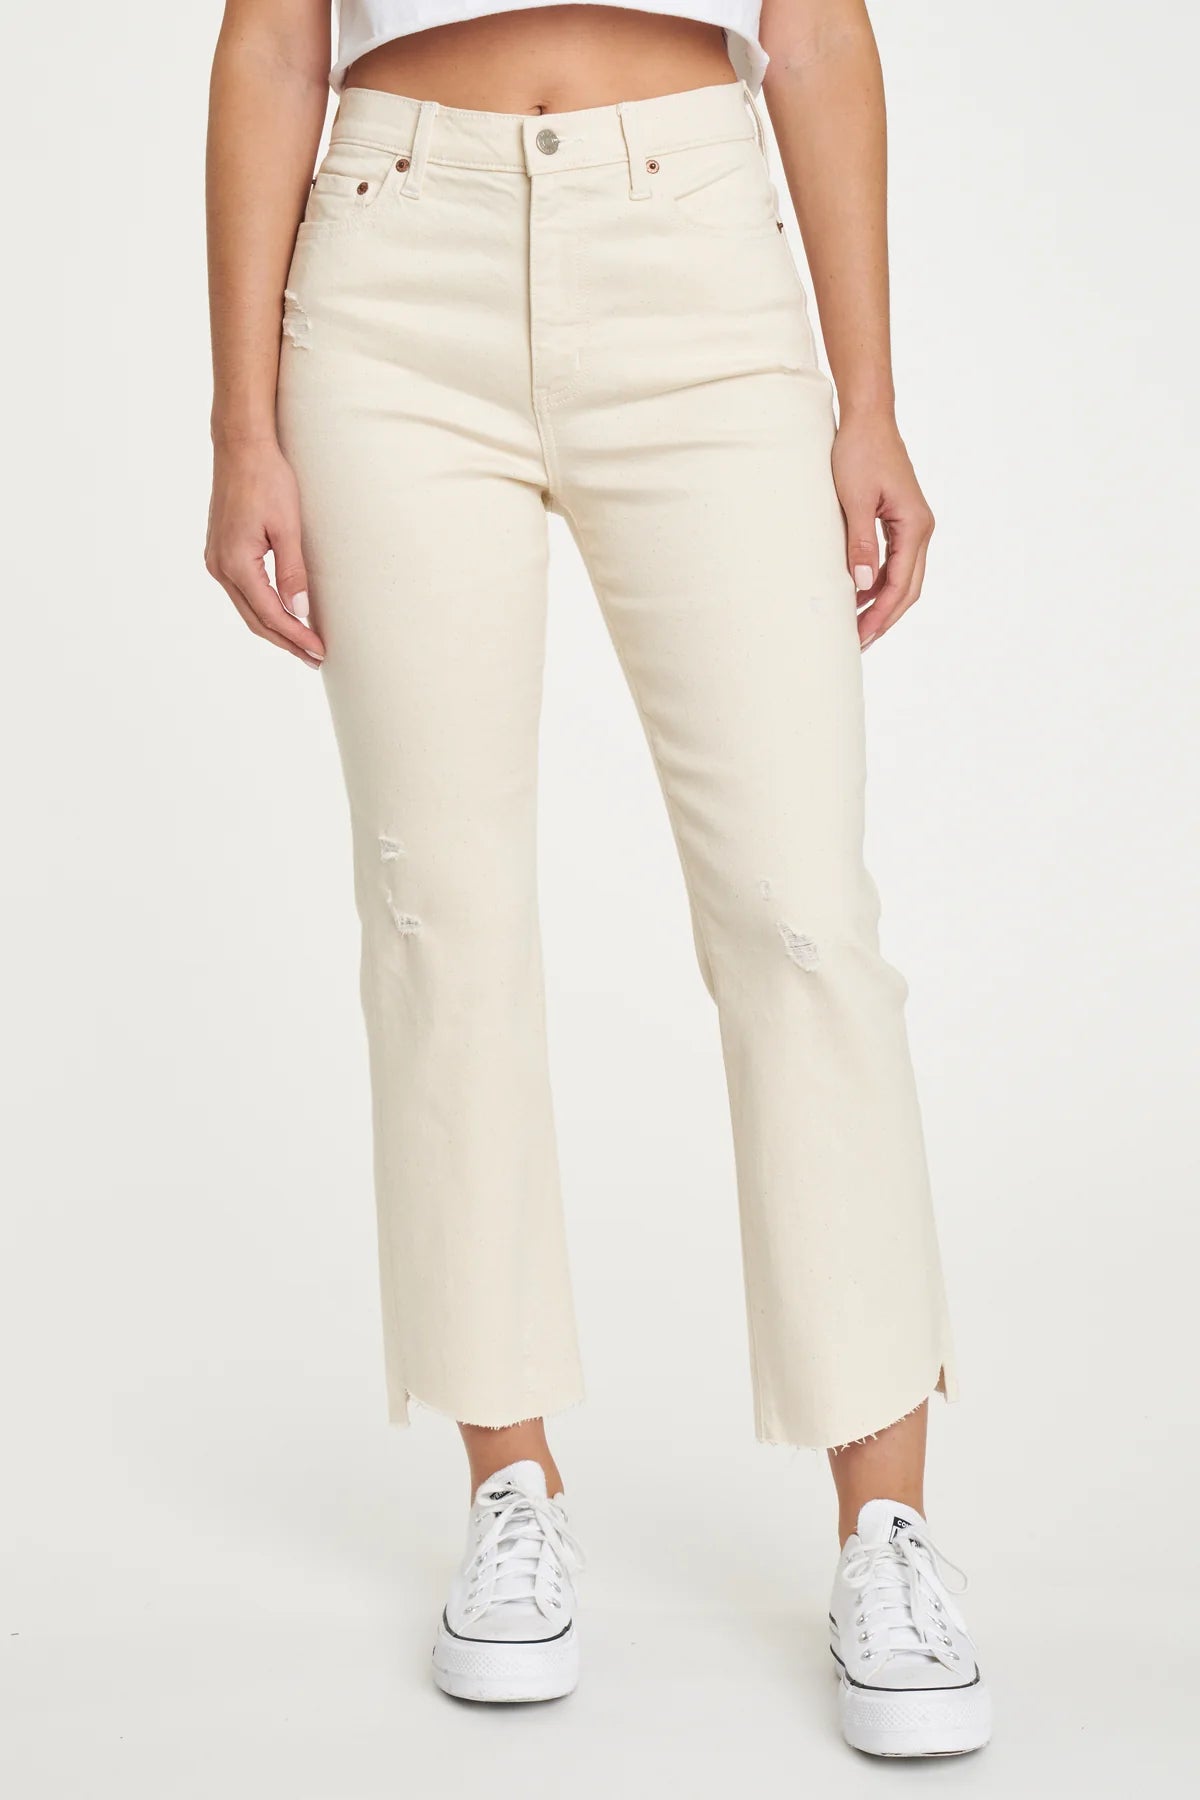 SHY GIRL HIGH RISE FLARE JEANS